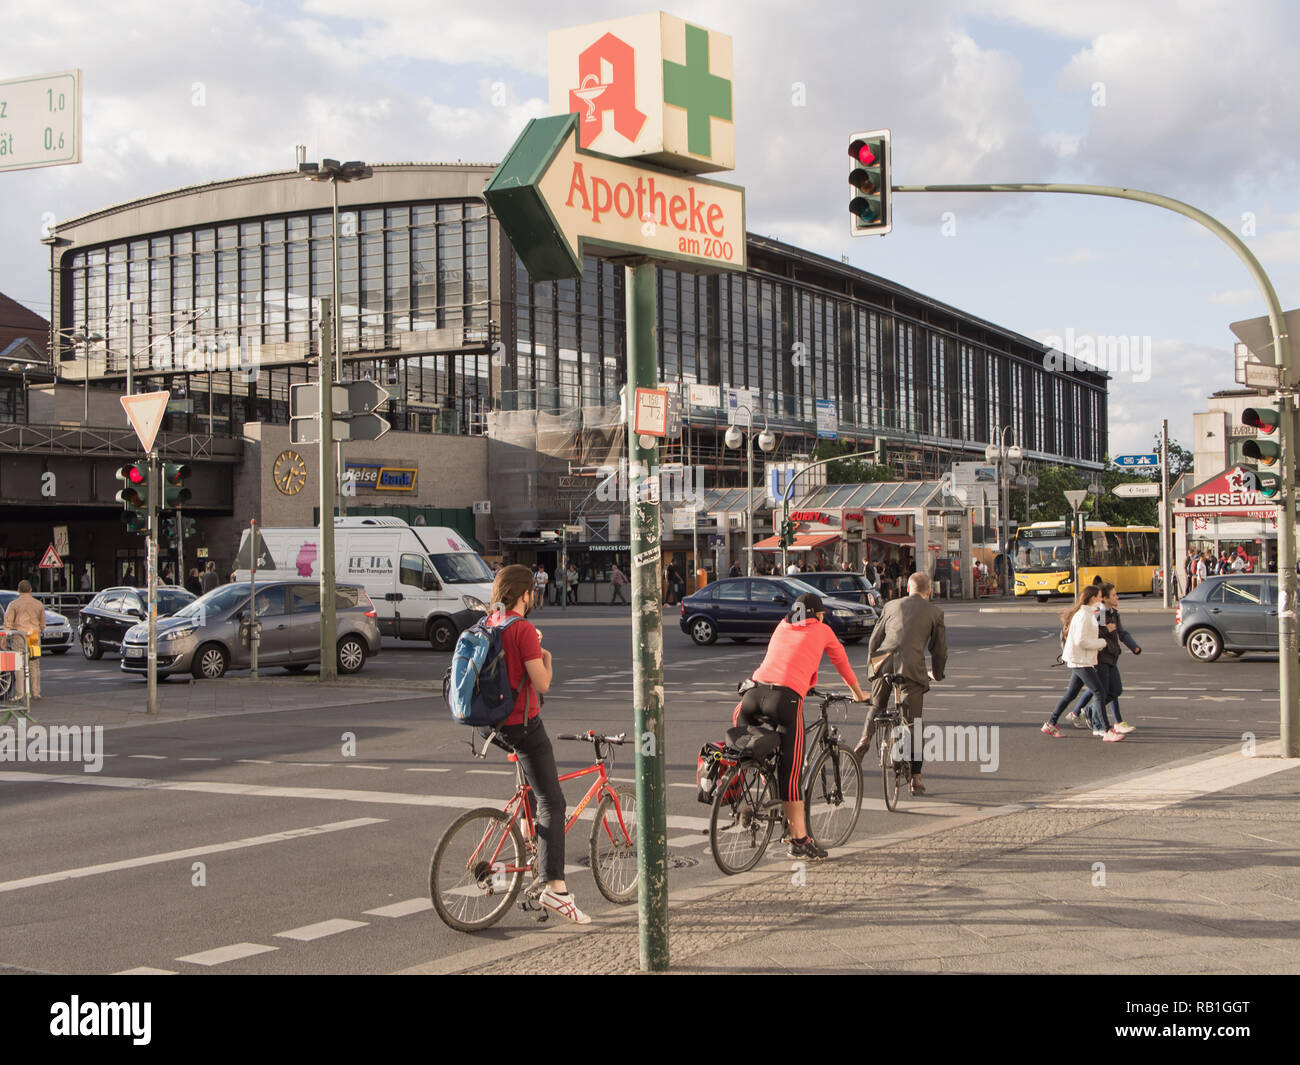 BERLIN, GERMANY - JULY 6, 2016: Bahnhof Zoo, central station with cyclists waiting at traffic lights Stock Photo